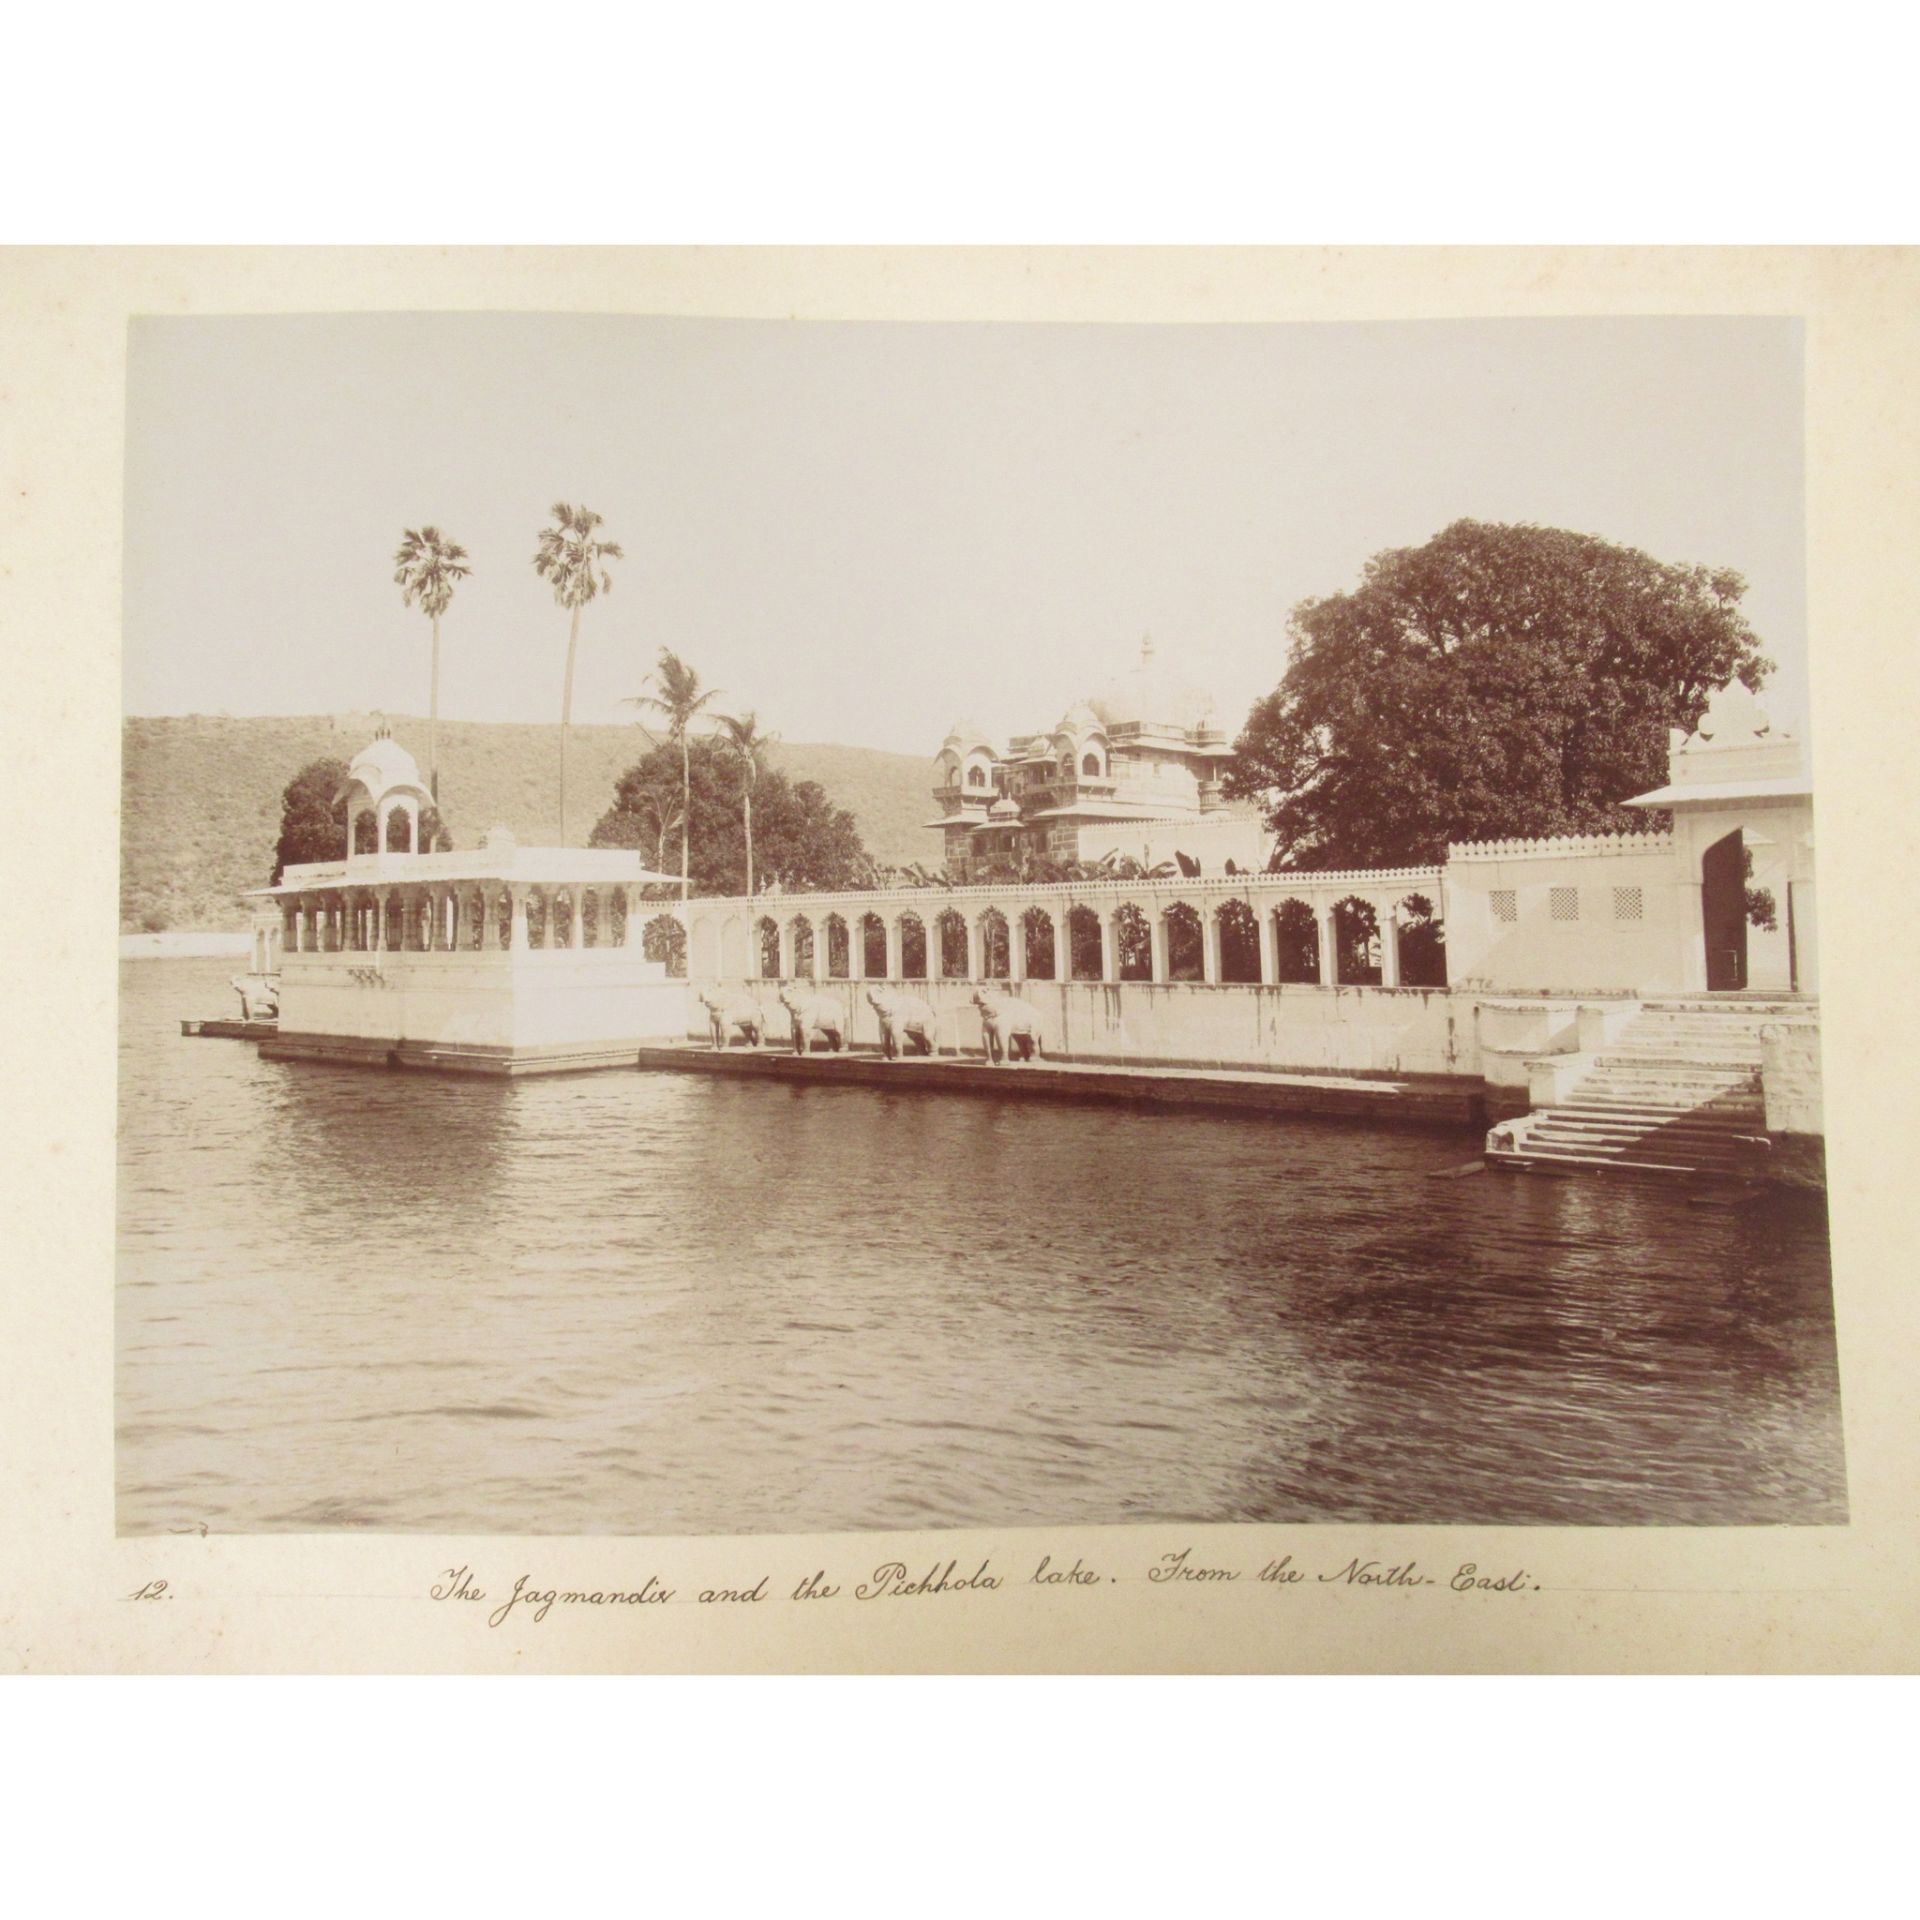 India: a photograph album Photographs of Rajasthan by Mohan Lal of Udaipur, late 19th century - Image 7 of 23